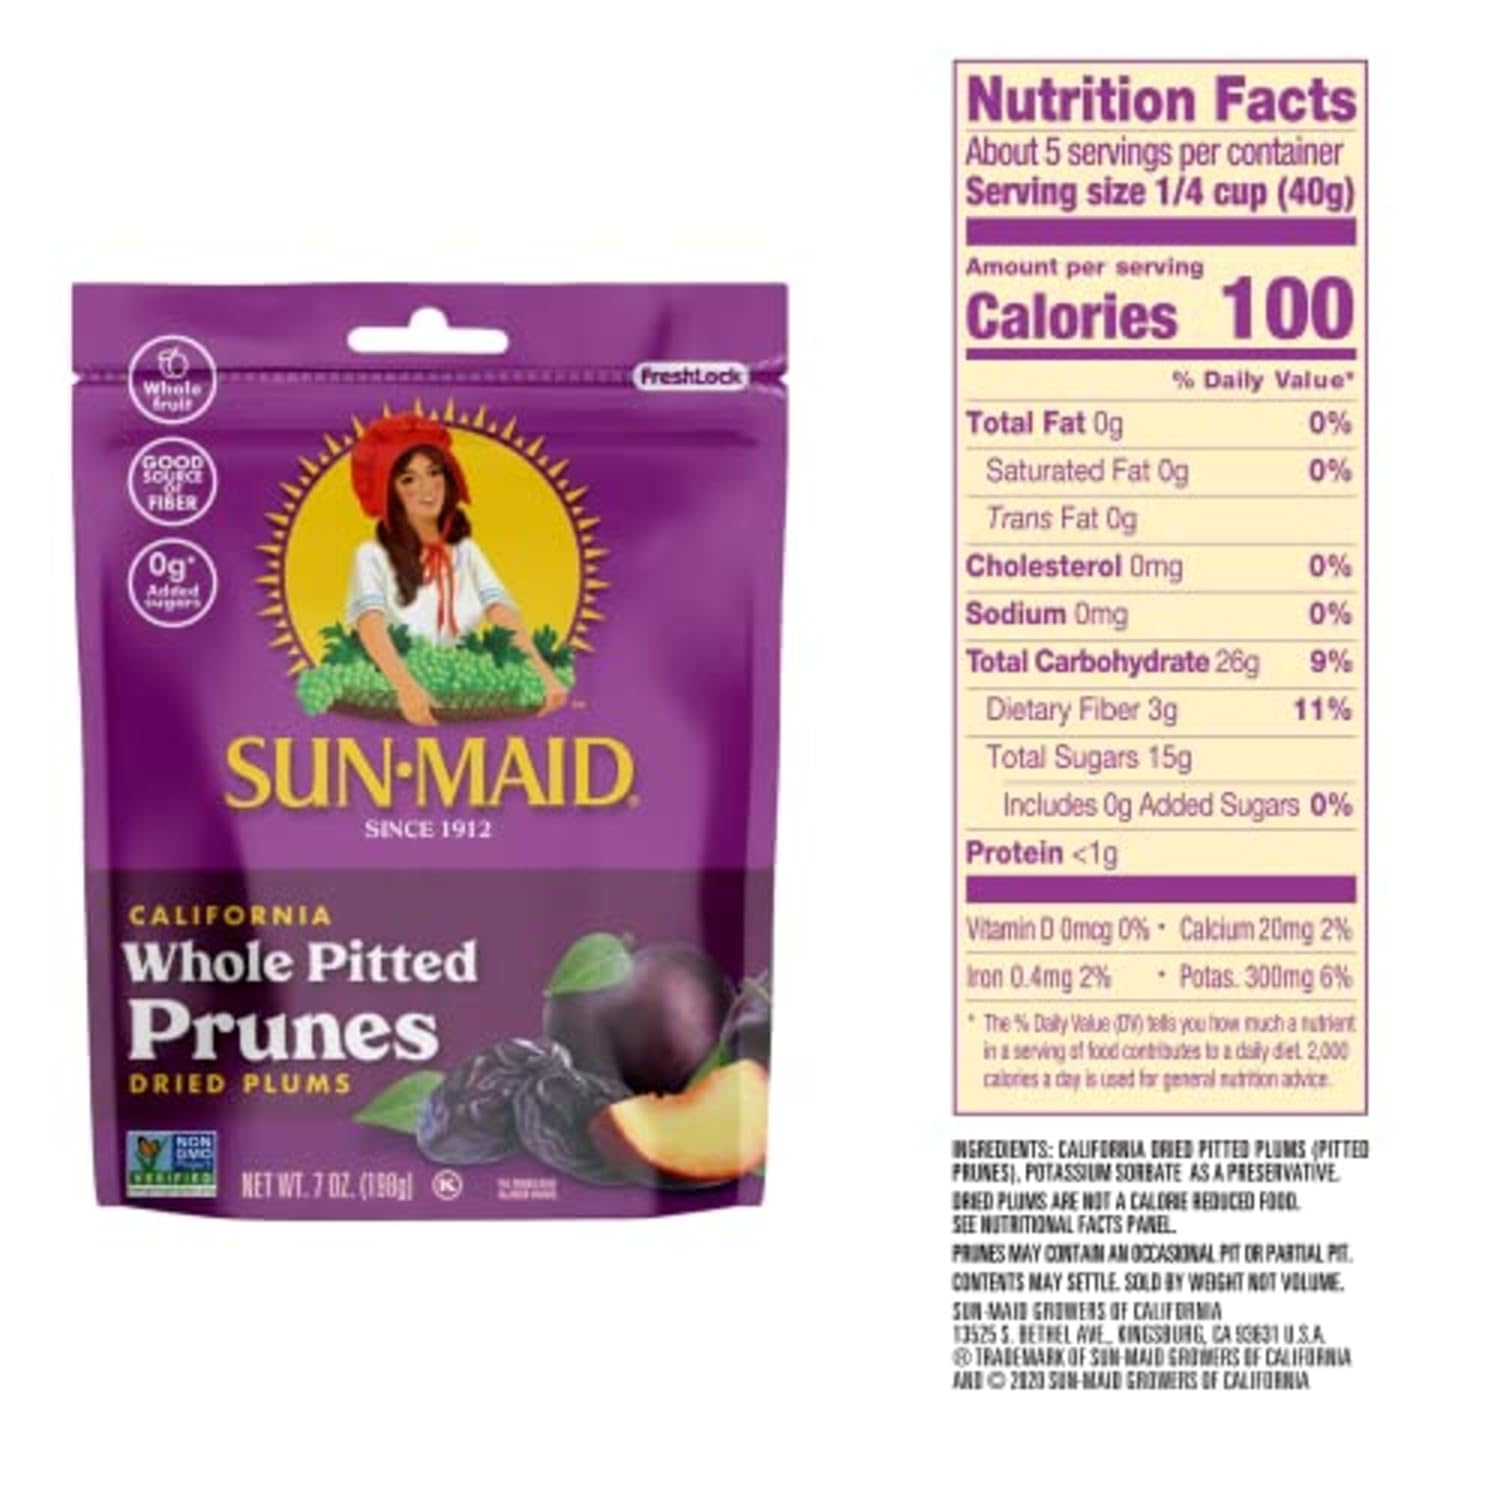 Sun-Maid California Sun-Dried Whole Pitted Prunes - (12 Pack) 7 oz Resealable Bag - Dried Plums - Dried Fruit Snack for Lunches, Snacks, and Natural Sweeteners : Grocery & Gourmet Food